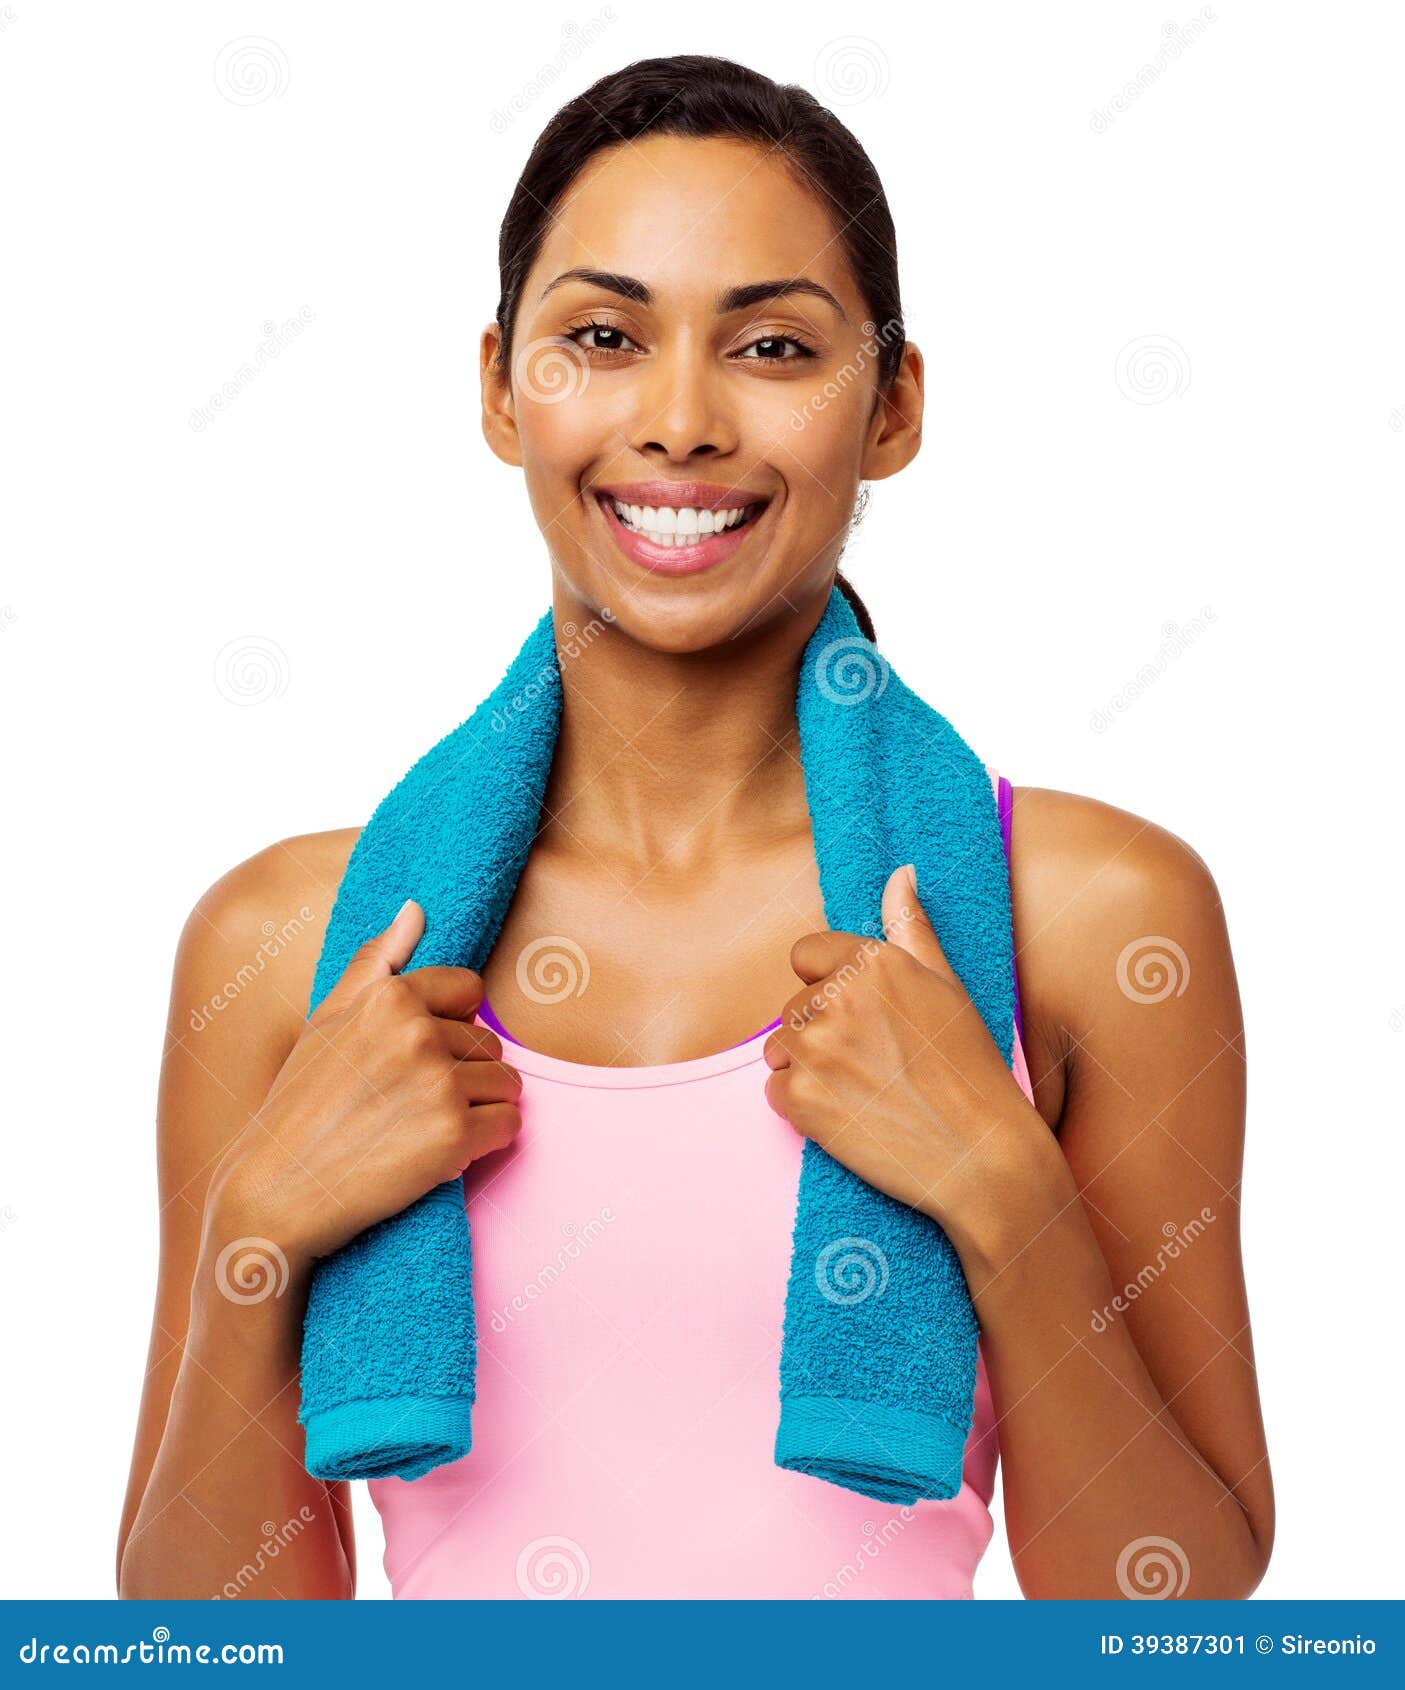 https://thumbs.dreamstime.com/z/fit-woman-holding-towel-around-neck-portrait-asian-over-white-background-horizontal-shot-39387301.jpg